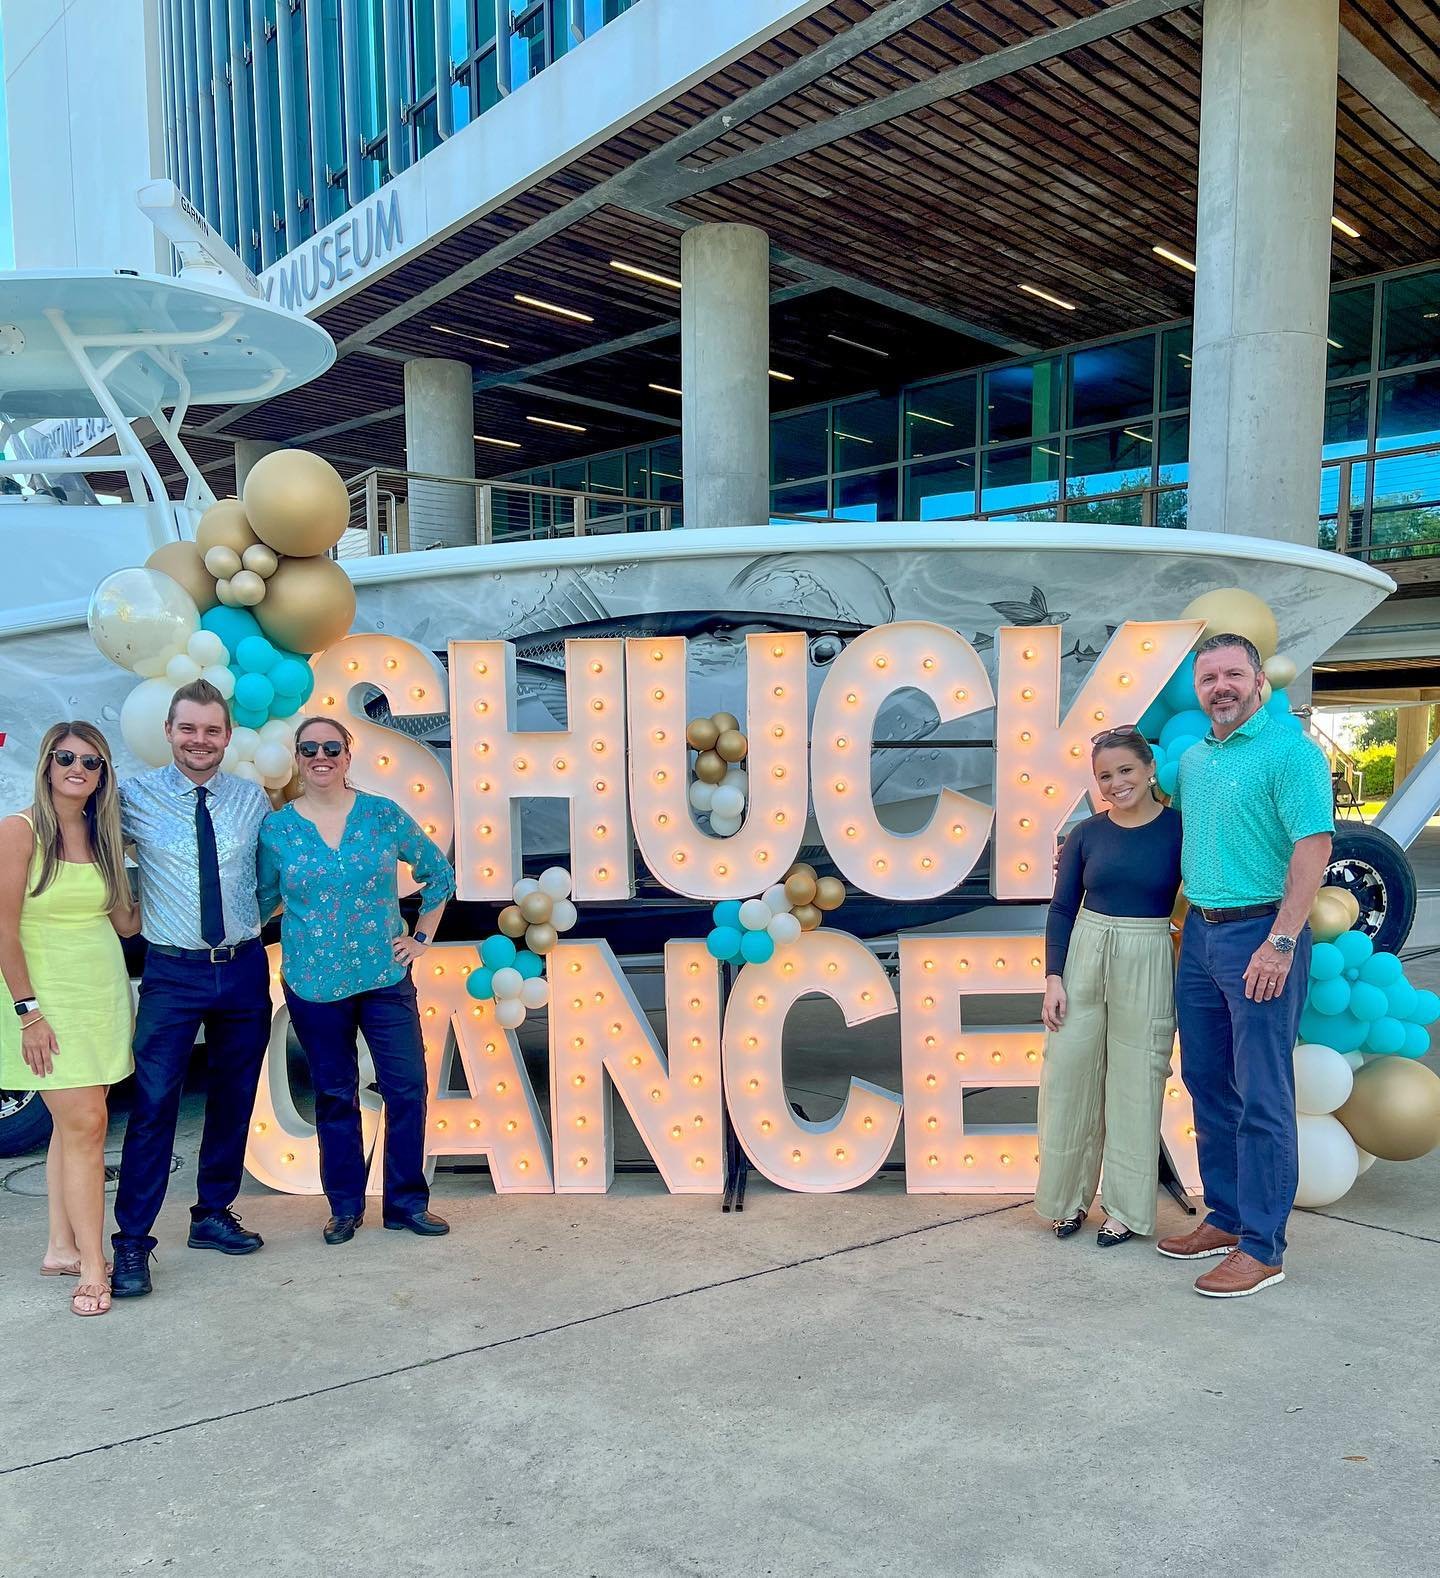 We were honored to participate in @shuckcancergulfcoast last night! We had so much fun serving our Bourbon Pecan Glazed Bacon, hanging out with great company, and fundraising for The American Cancer Society. ✨🥂 

&ldquo;The American Cancer Society&r